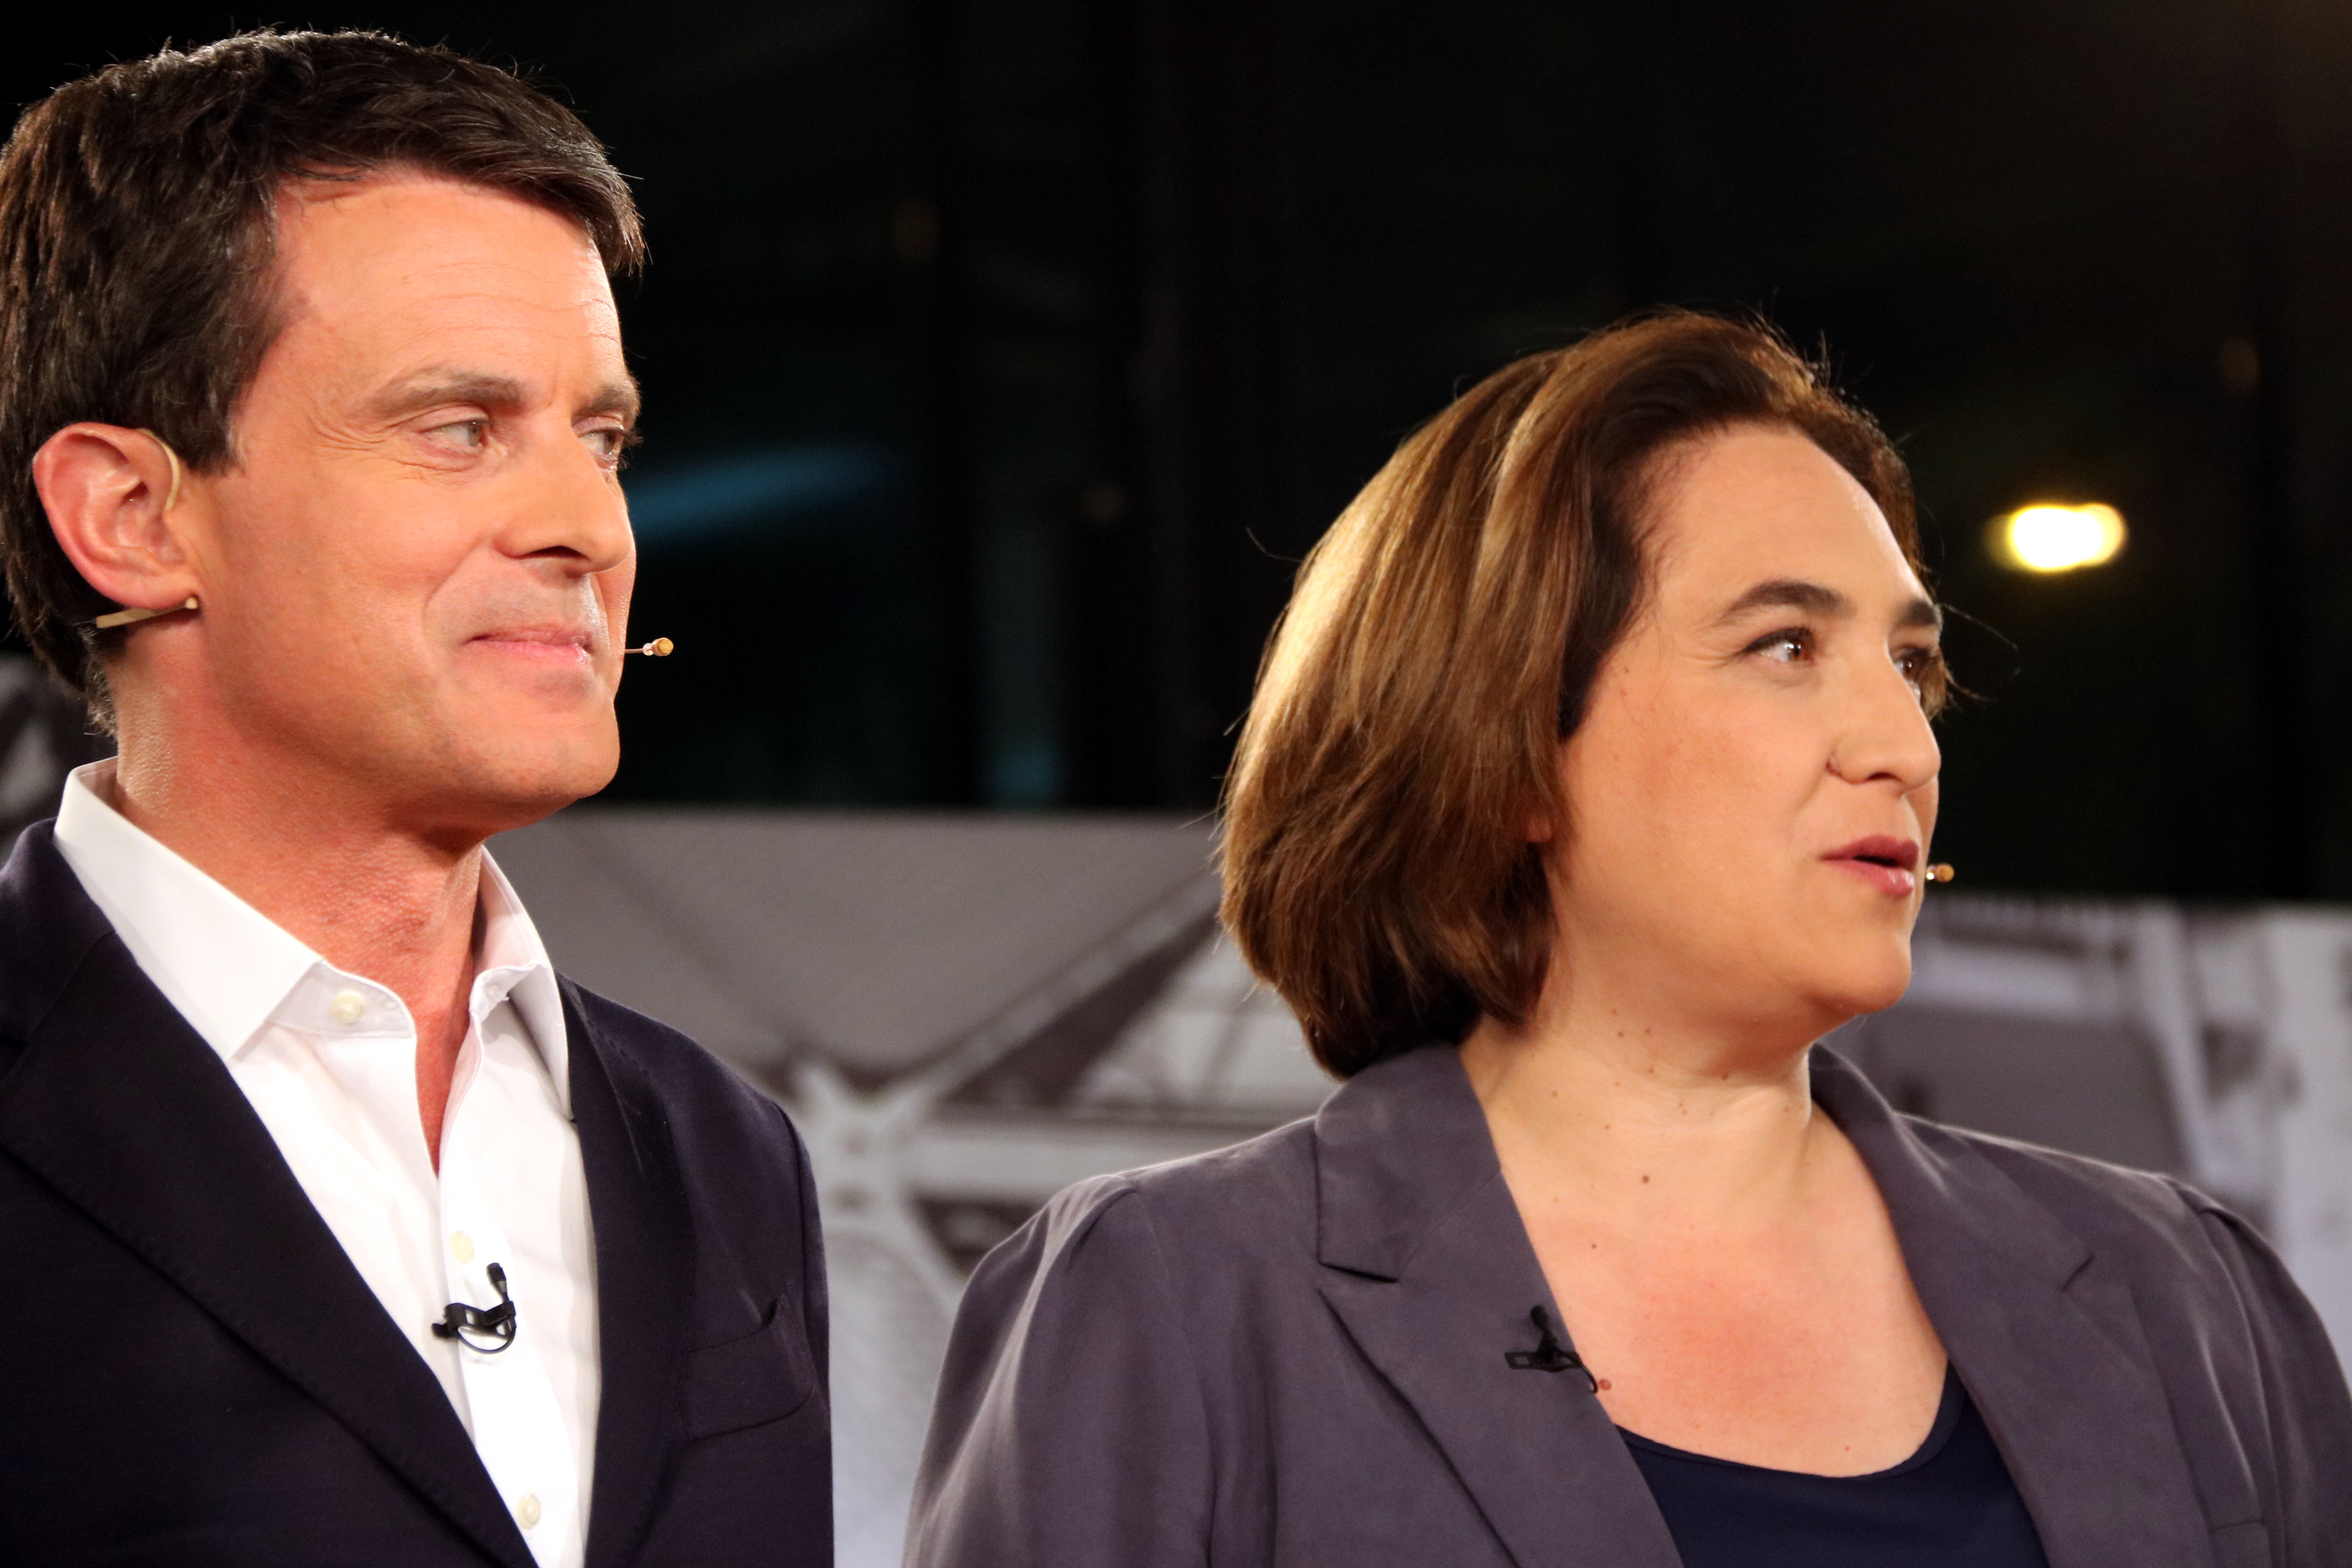 Barcelona mayor Ada Colau (right) and Ciutadans' candidate in the local election, Manuel Valls (by Nazaret Romero)